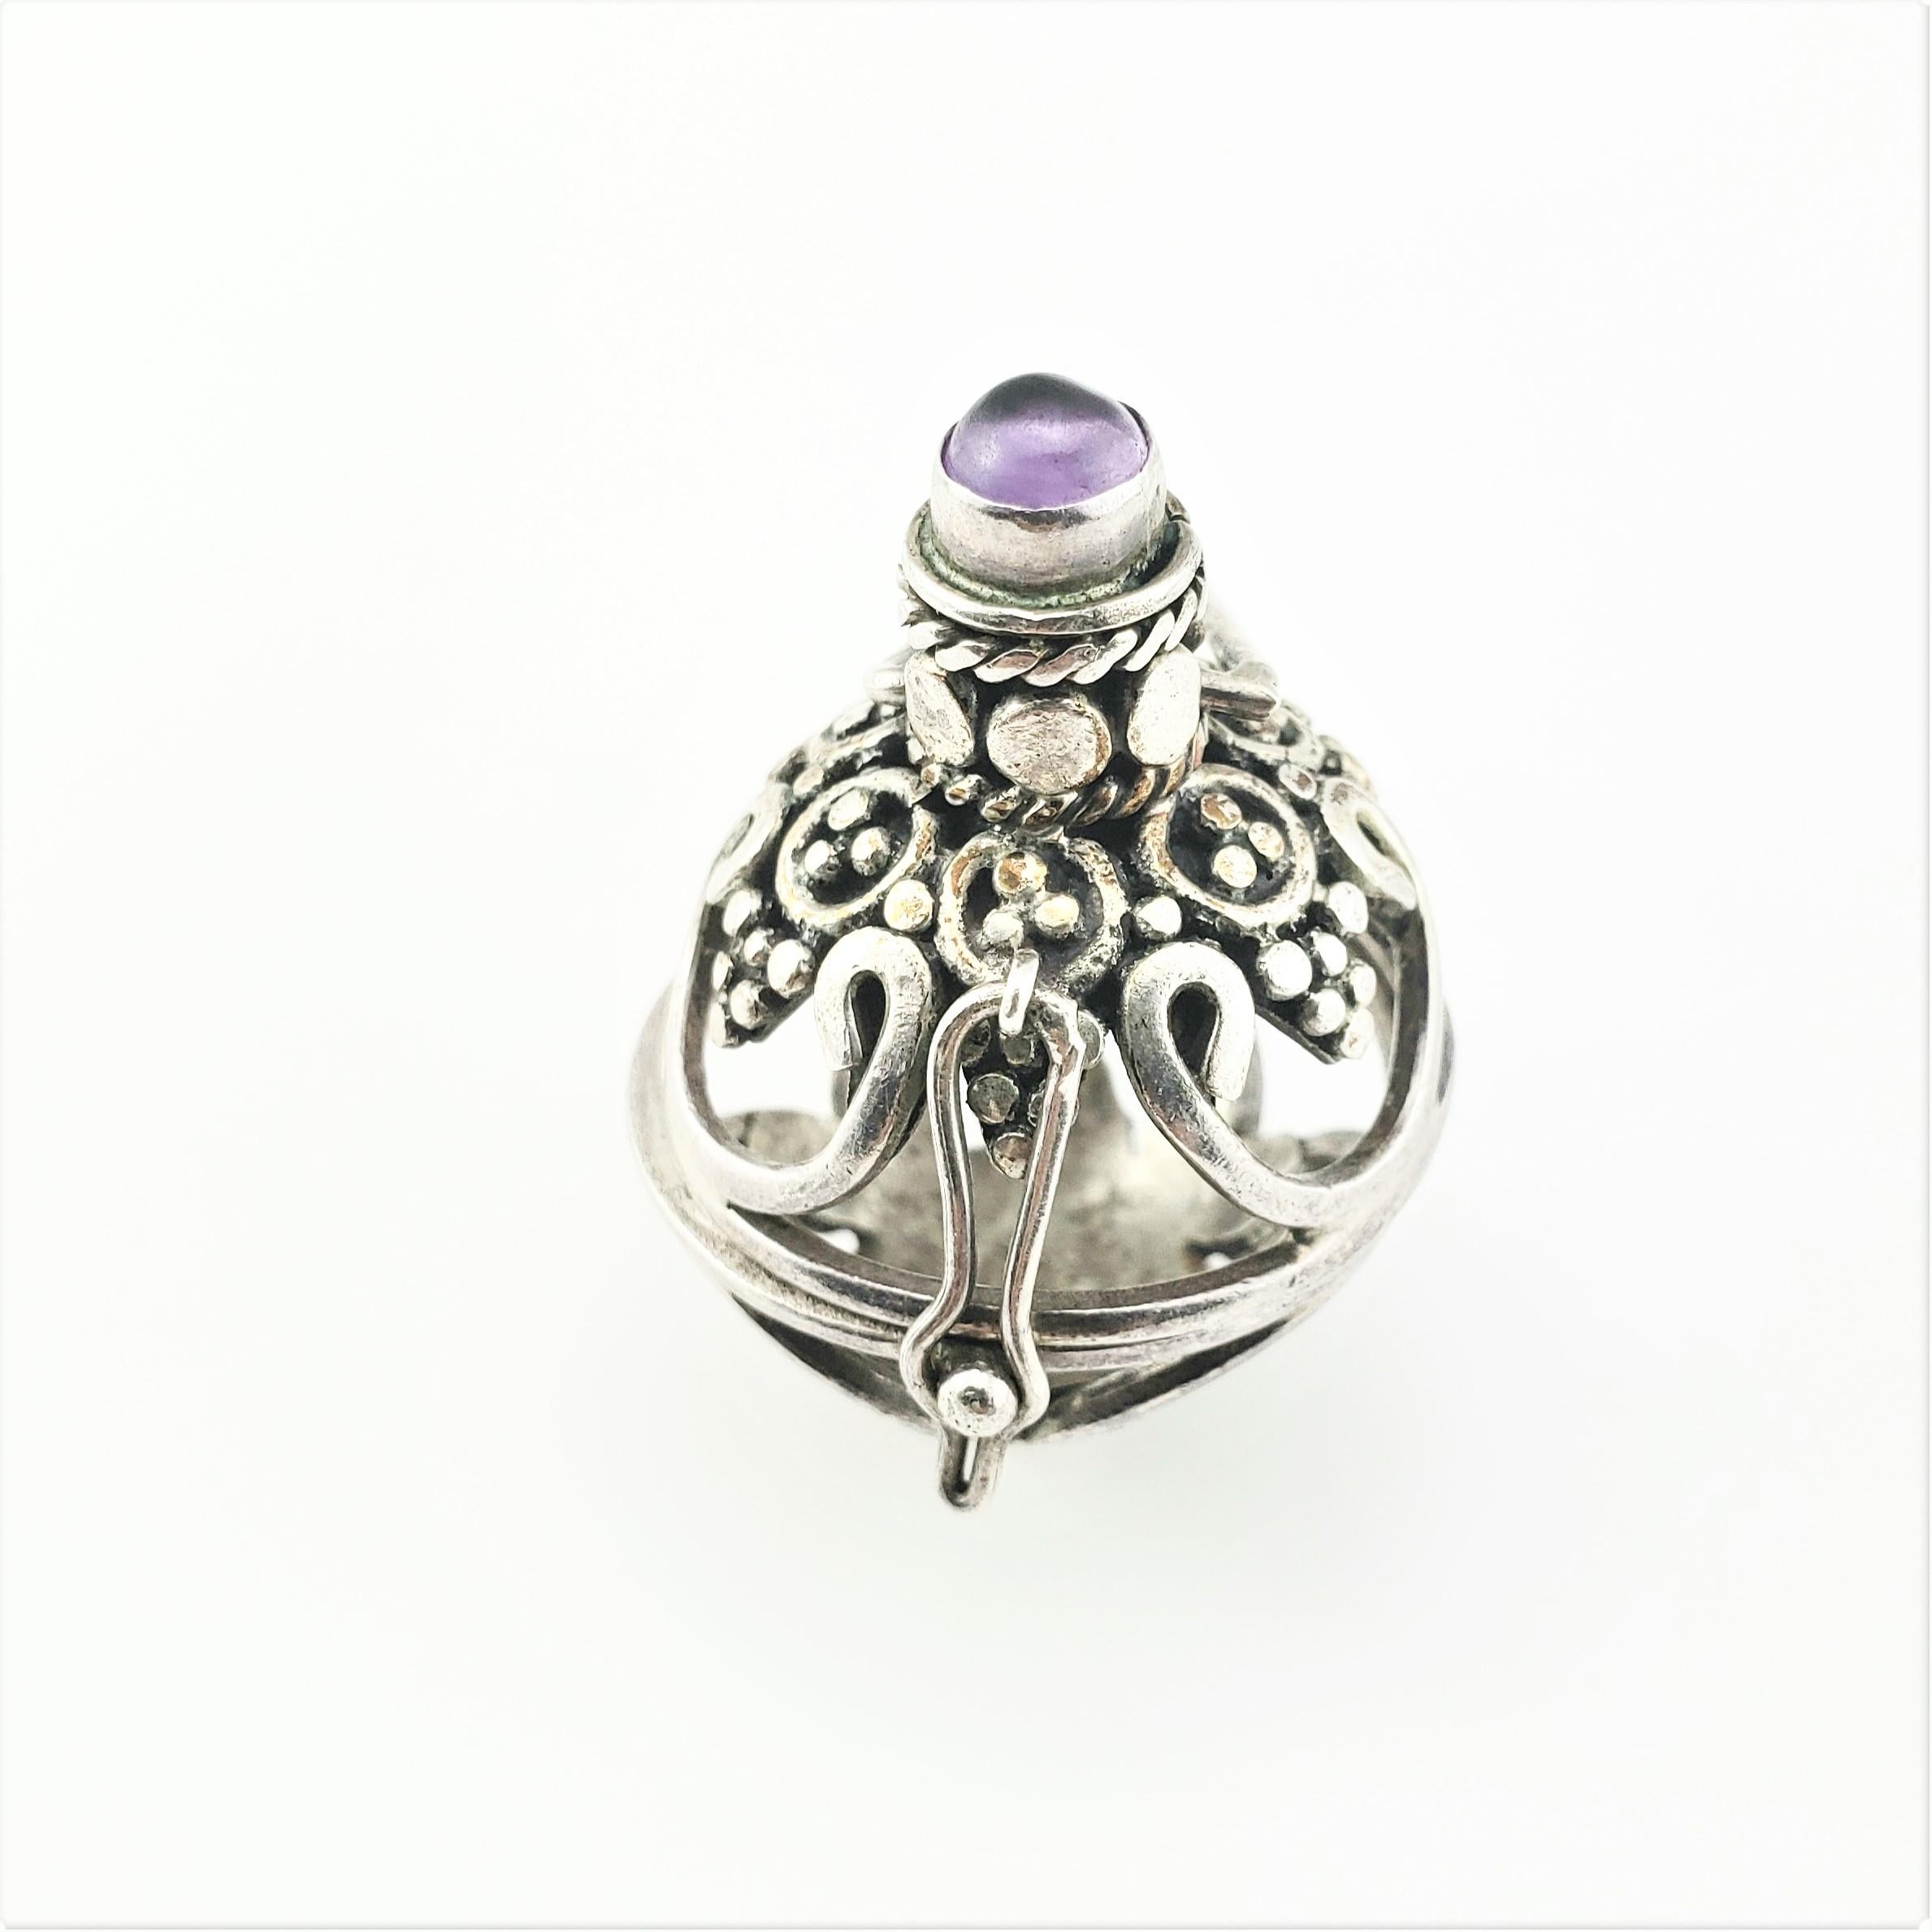 Vintage Sterling Silver Amethyst Harmony Ball Locket Pendant-

This lovely hinged harmony ball locket is accented with one amethyst stone (5 mm) and crafted in beautifully detailed sterling silver.

Size: 2 1/4 inches length

Diameter: 23